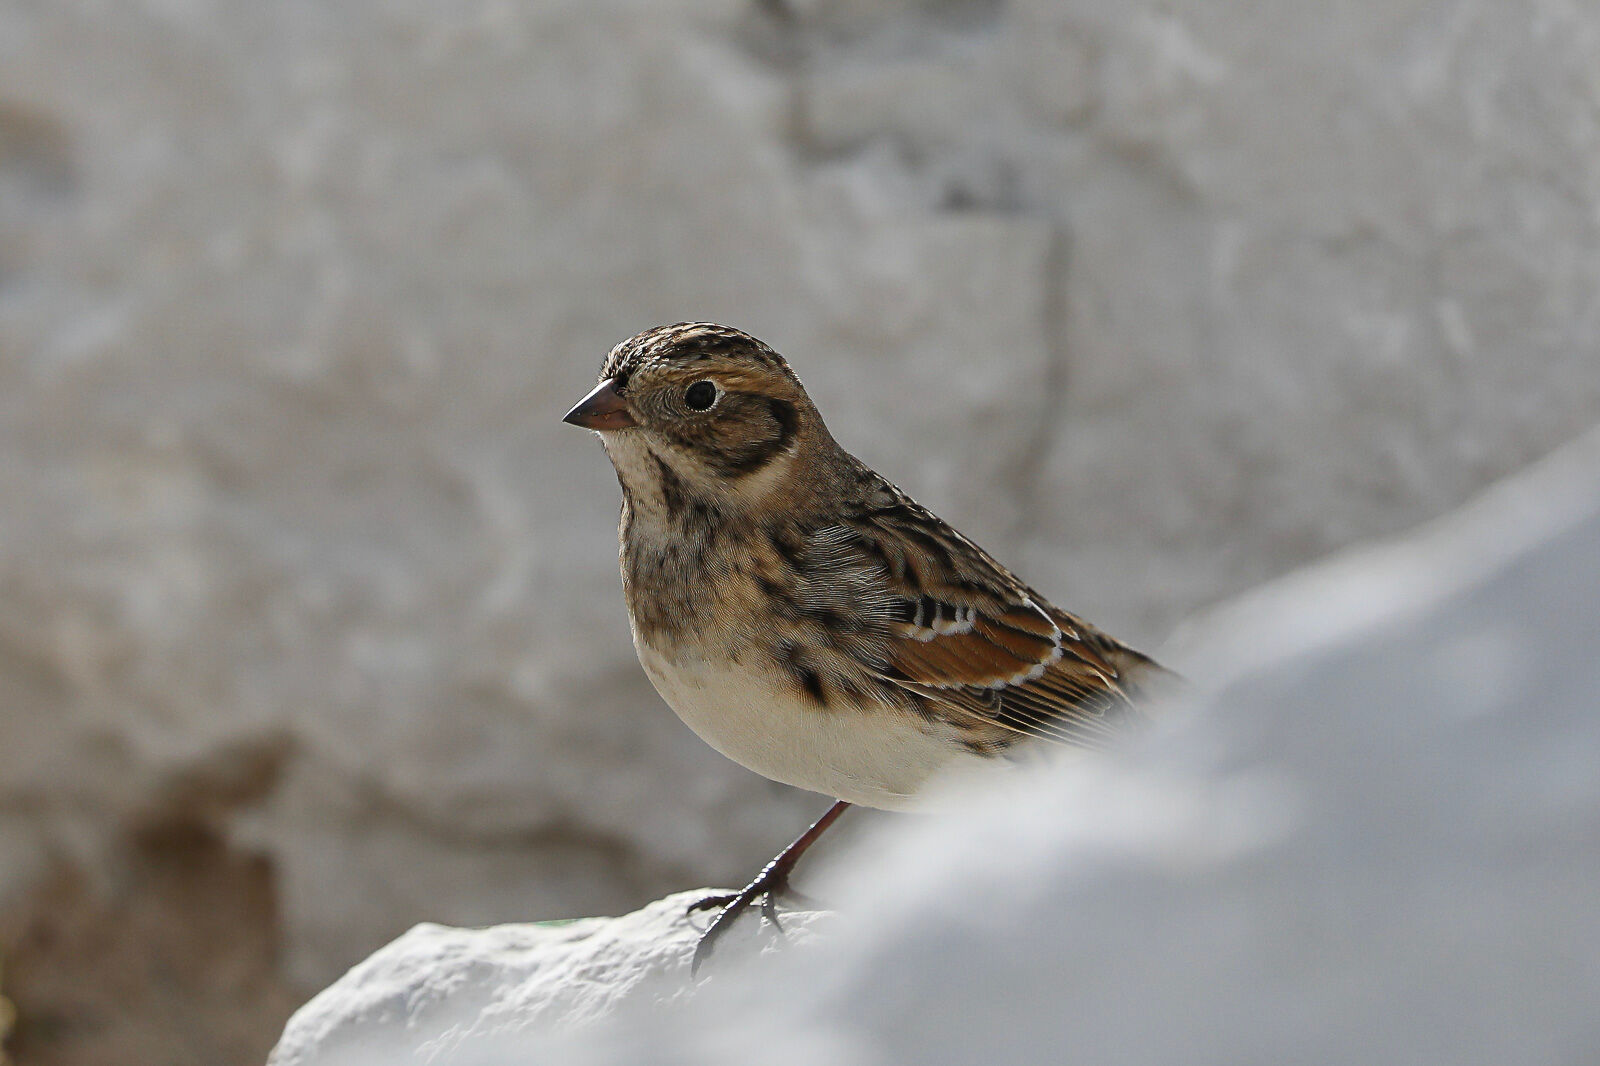 Snow Bunting in the rock along Milwaukee's Lakefront